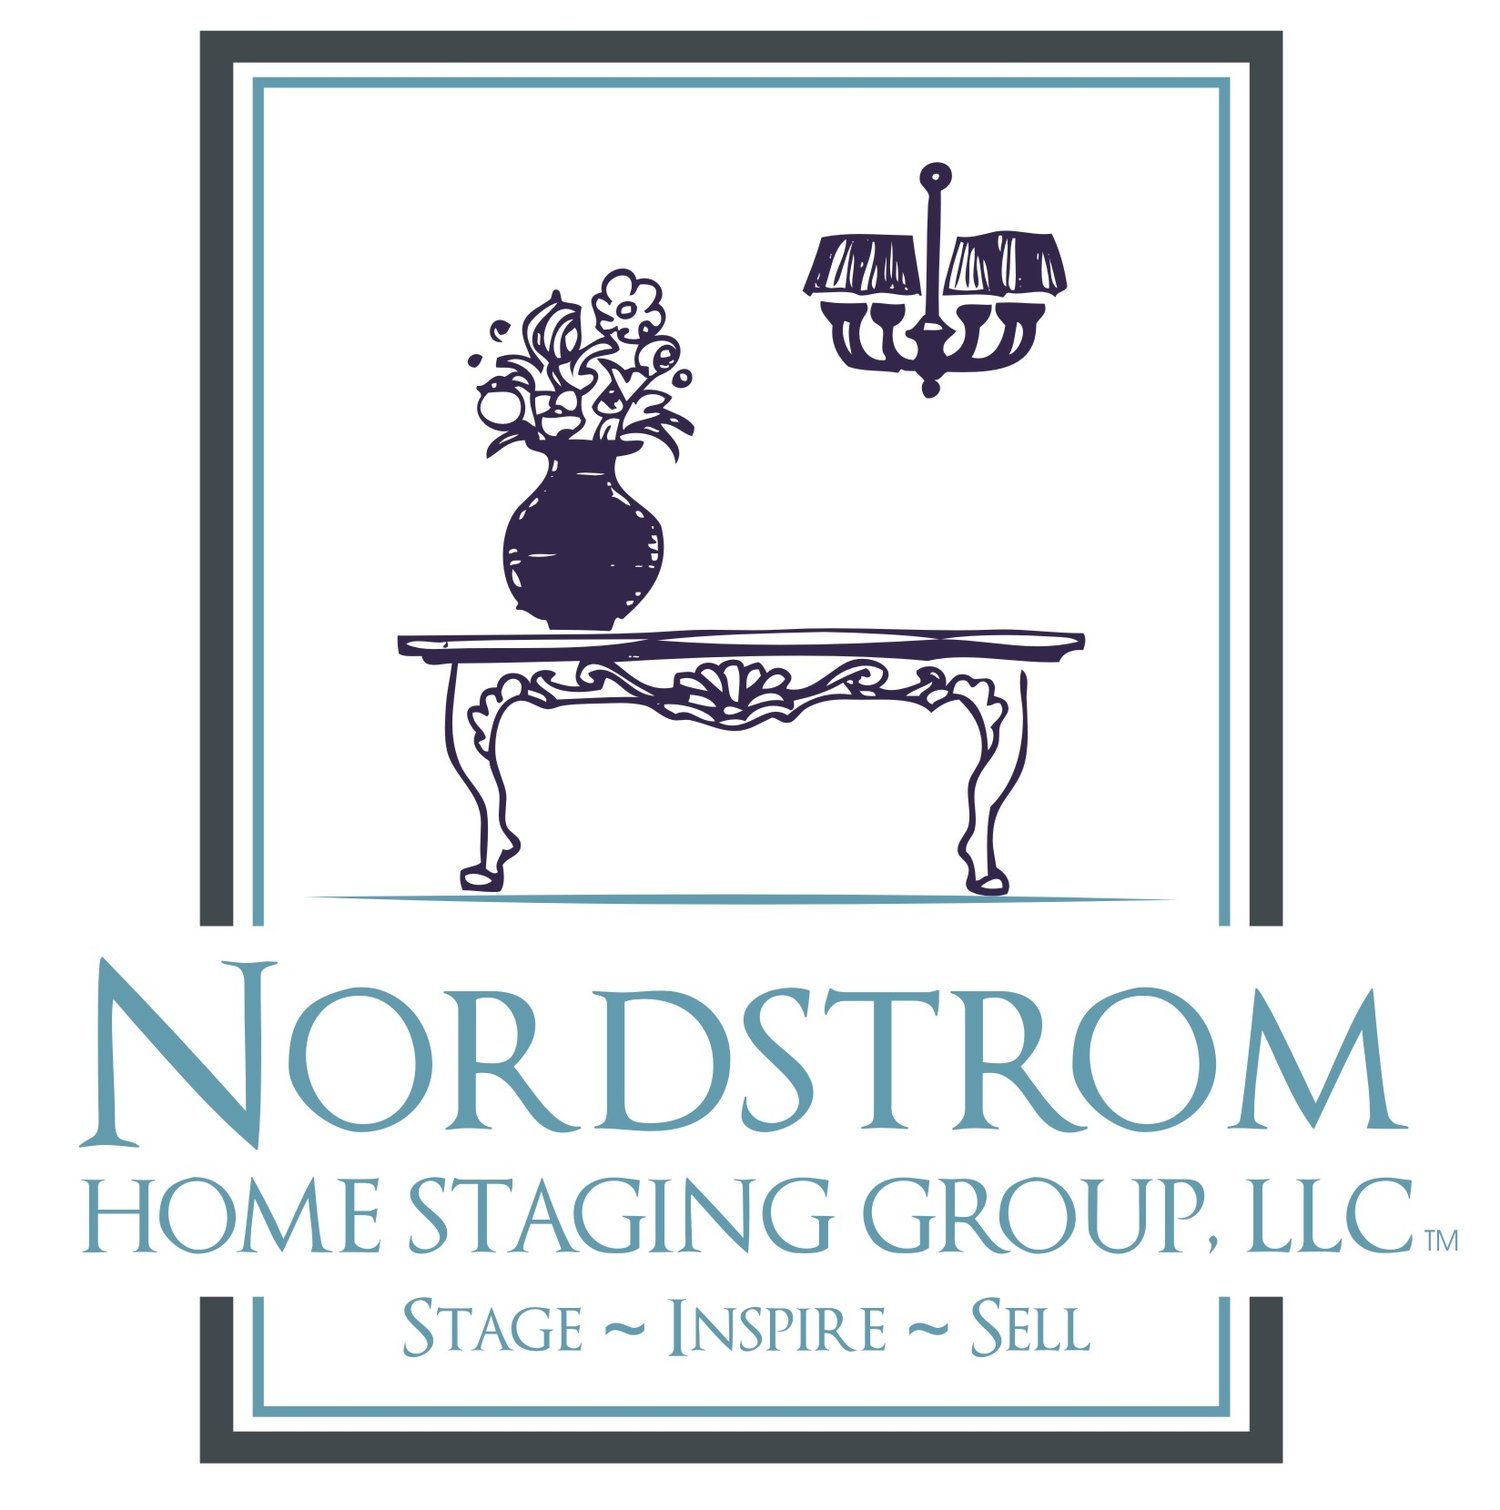 Nordstrom Home Staging and Redesign Group